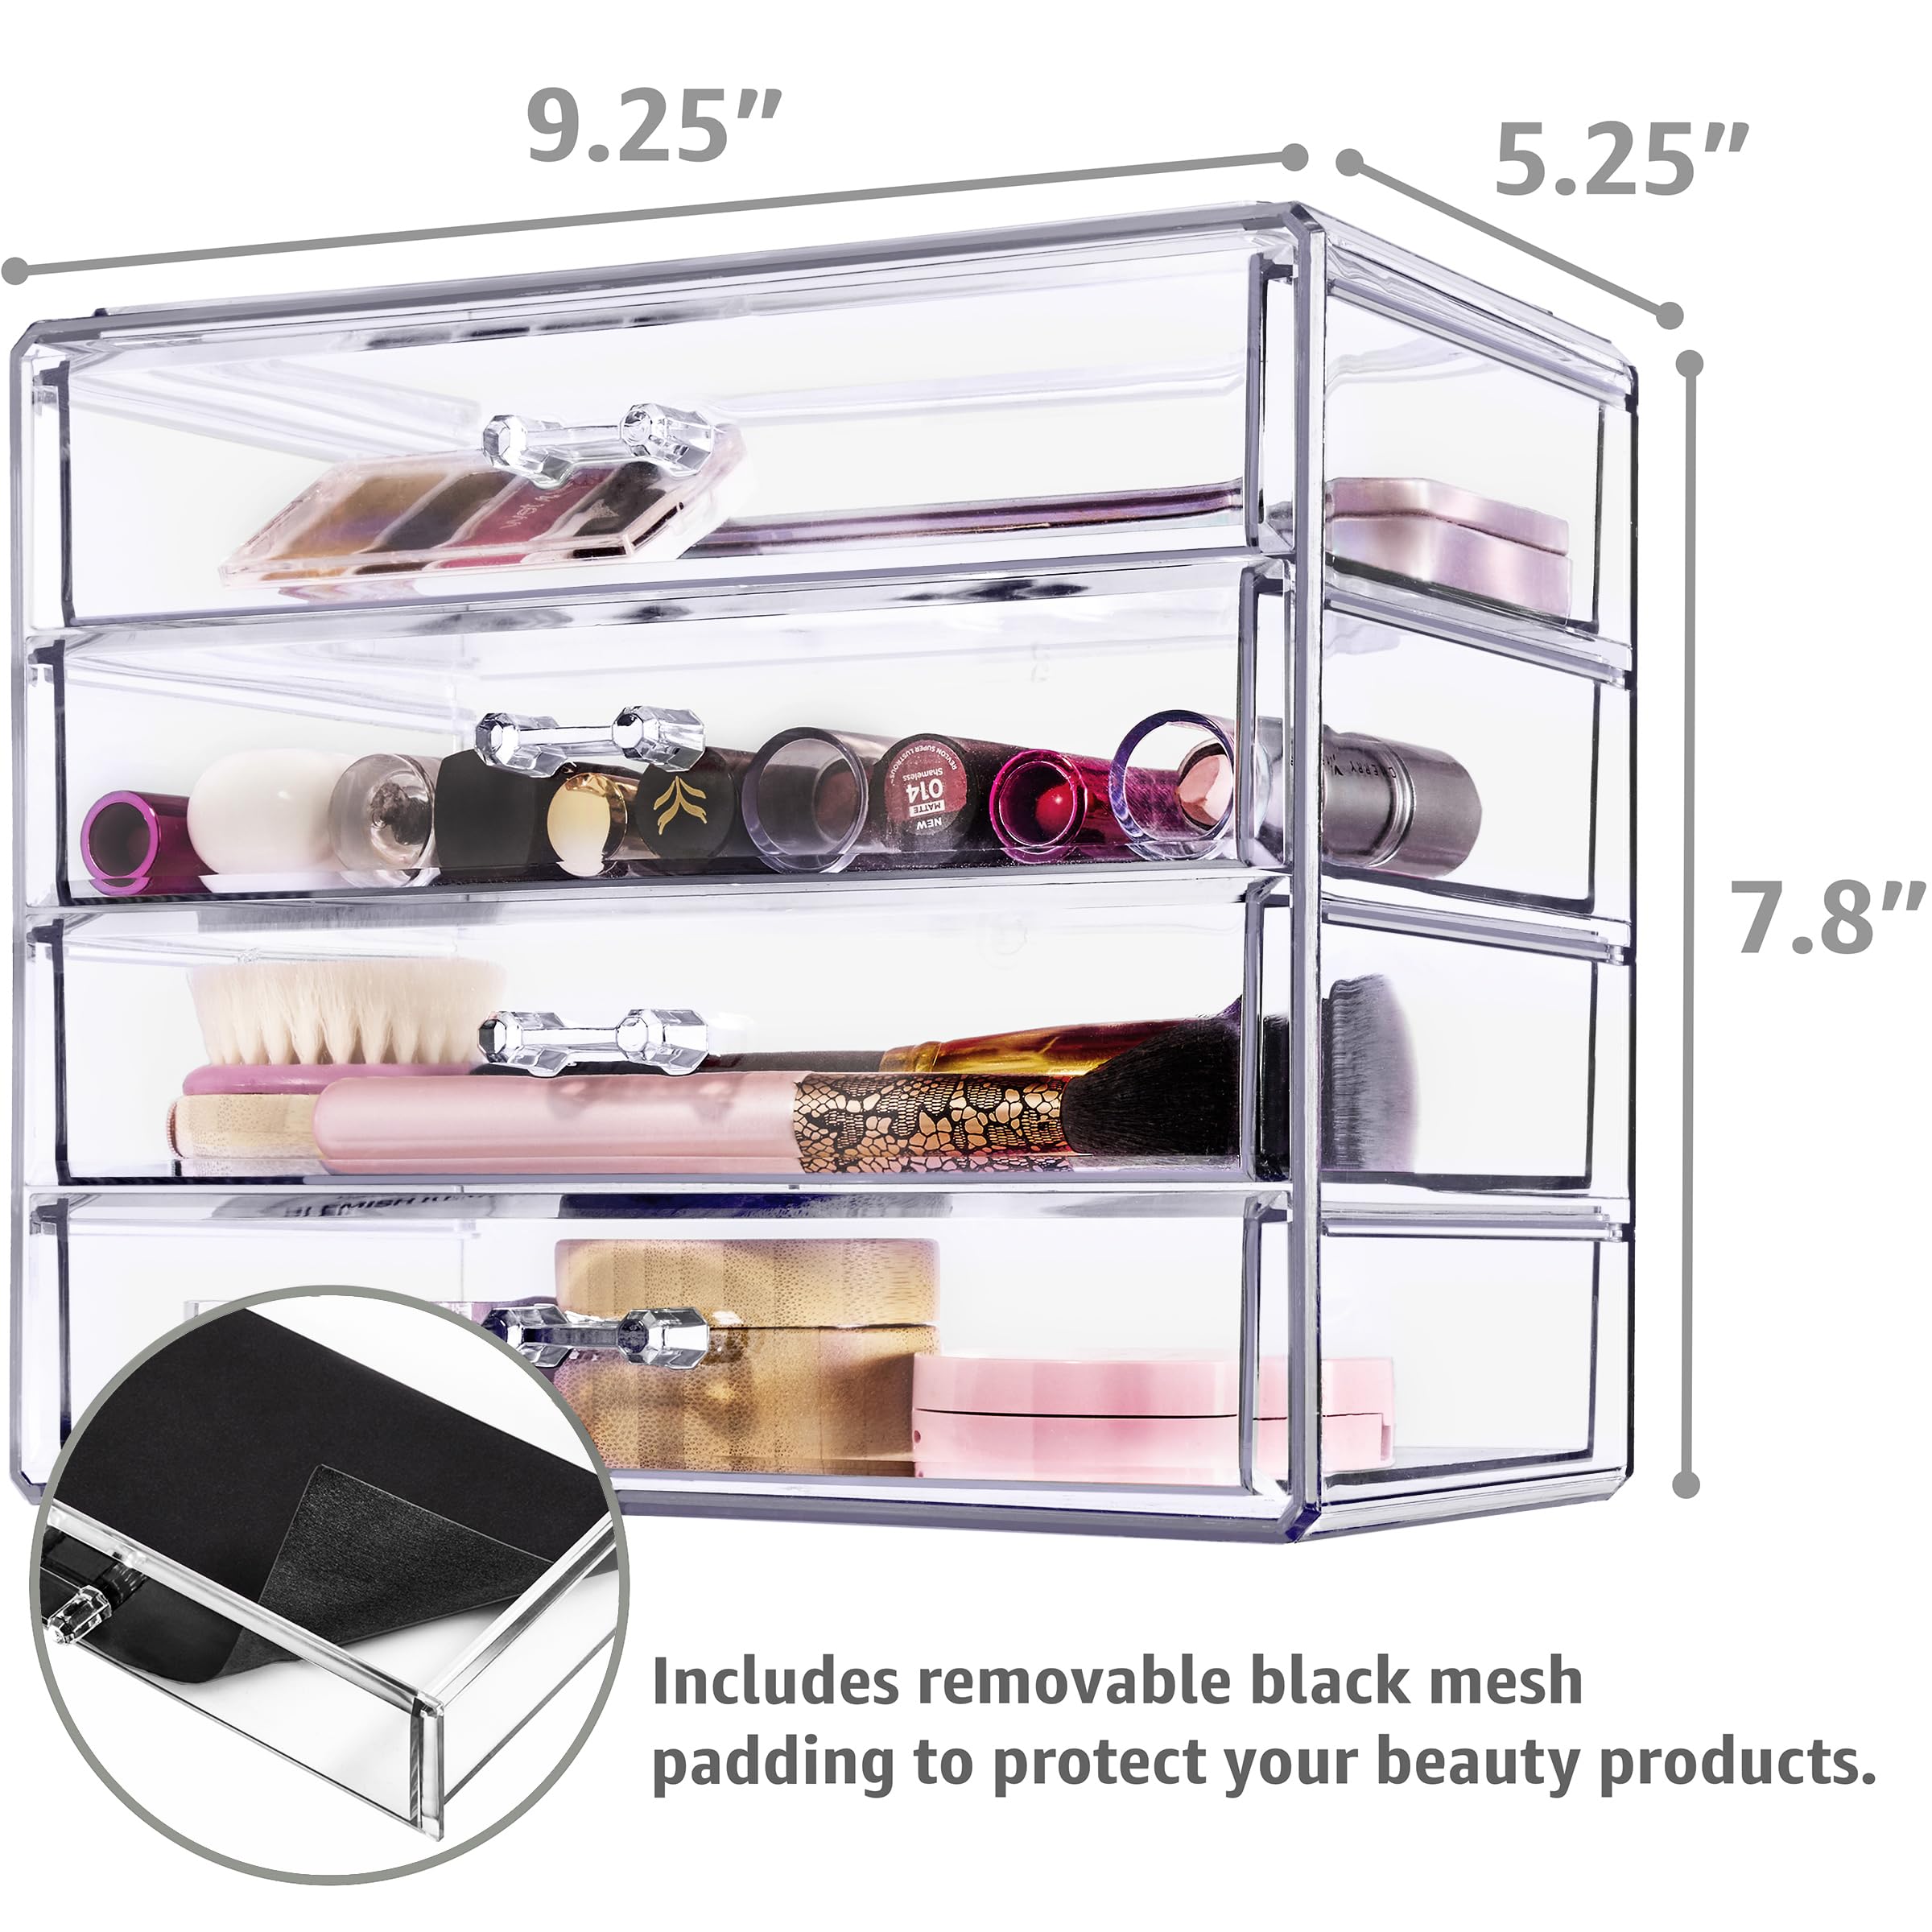 Sorbus Makeup Organizer - 4 Drawer Acrylic Make Up Organizers and Storage for Cosmetics, Jewelry, Beauty Supplies, Clear Makeup Organizer for Vanity, Girl's Room, College Dorm, Counter, Bathroom Sink